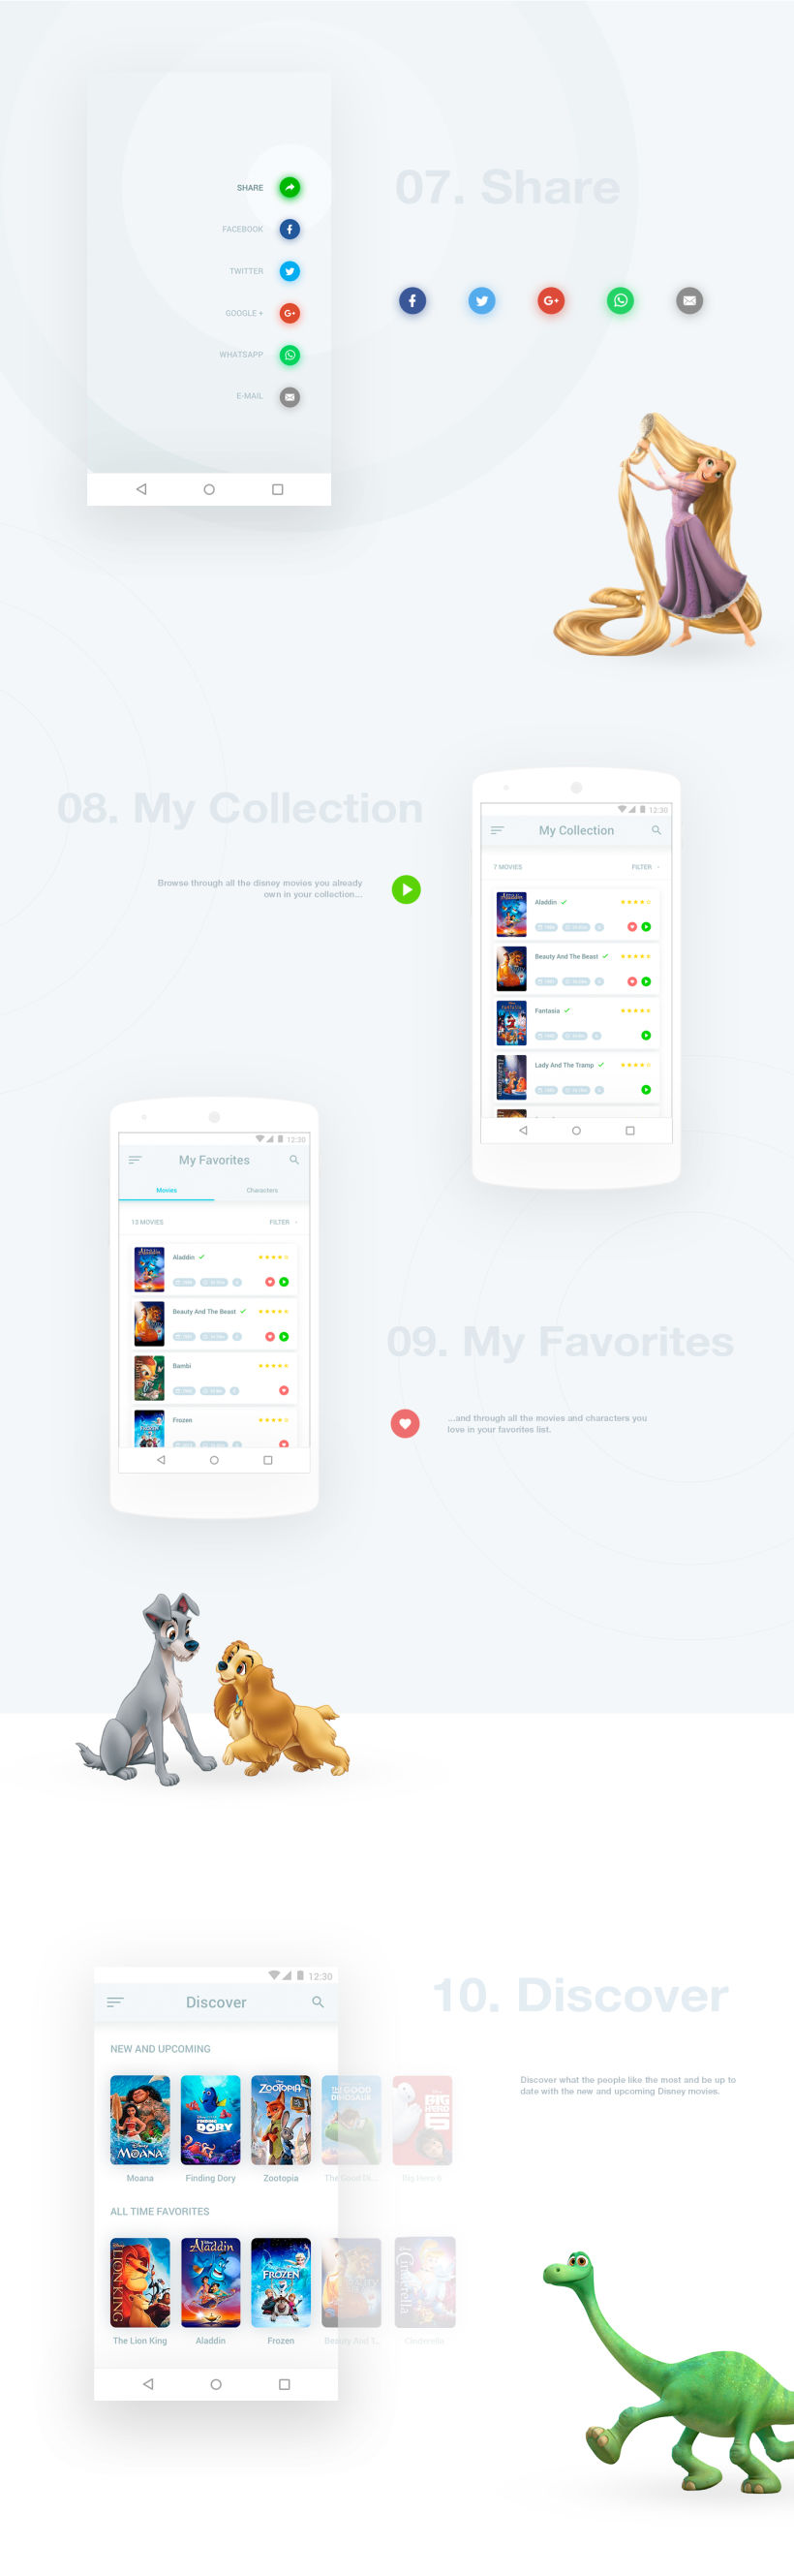 Disney Movies Anywhere - Mobile App Redesign 5